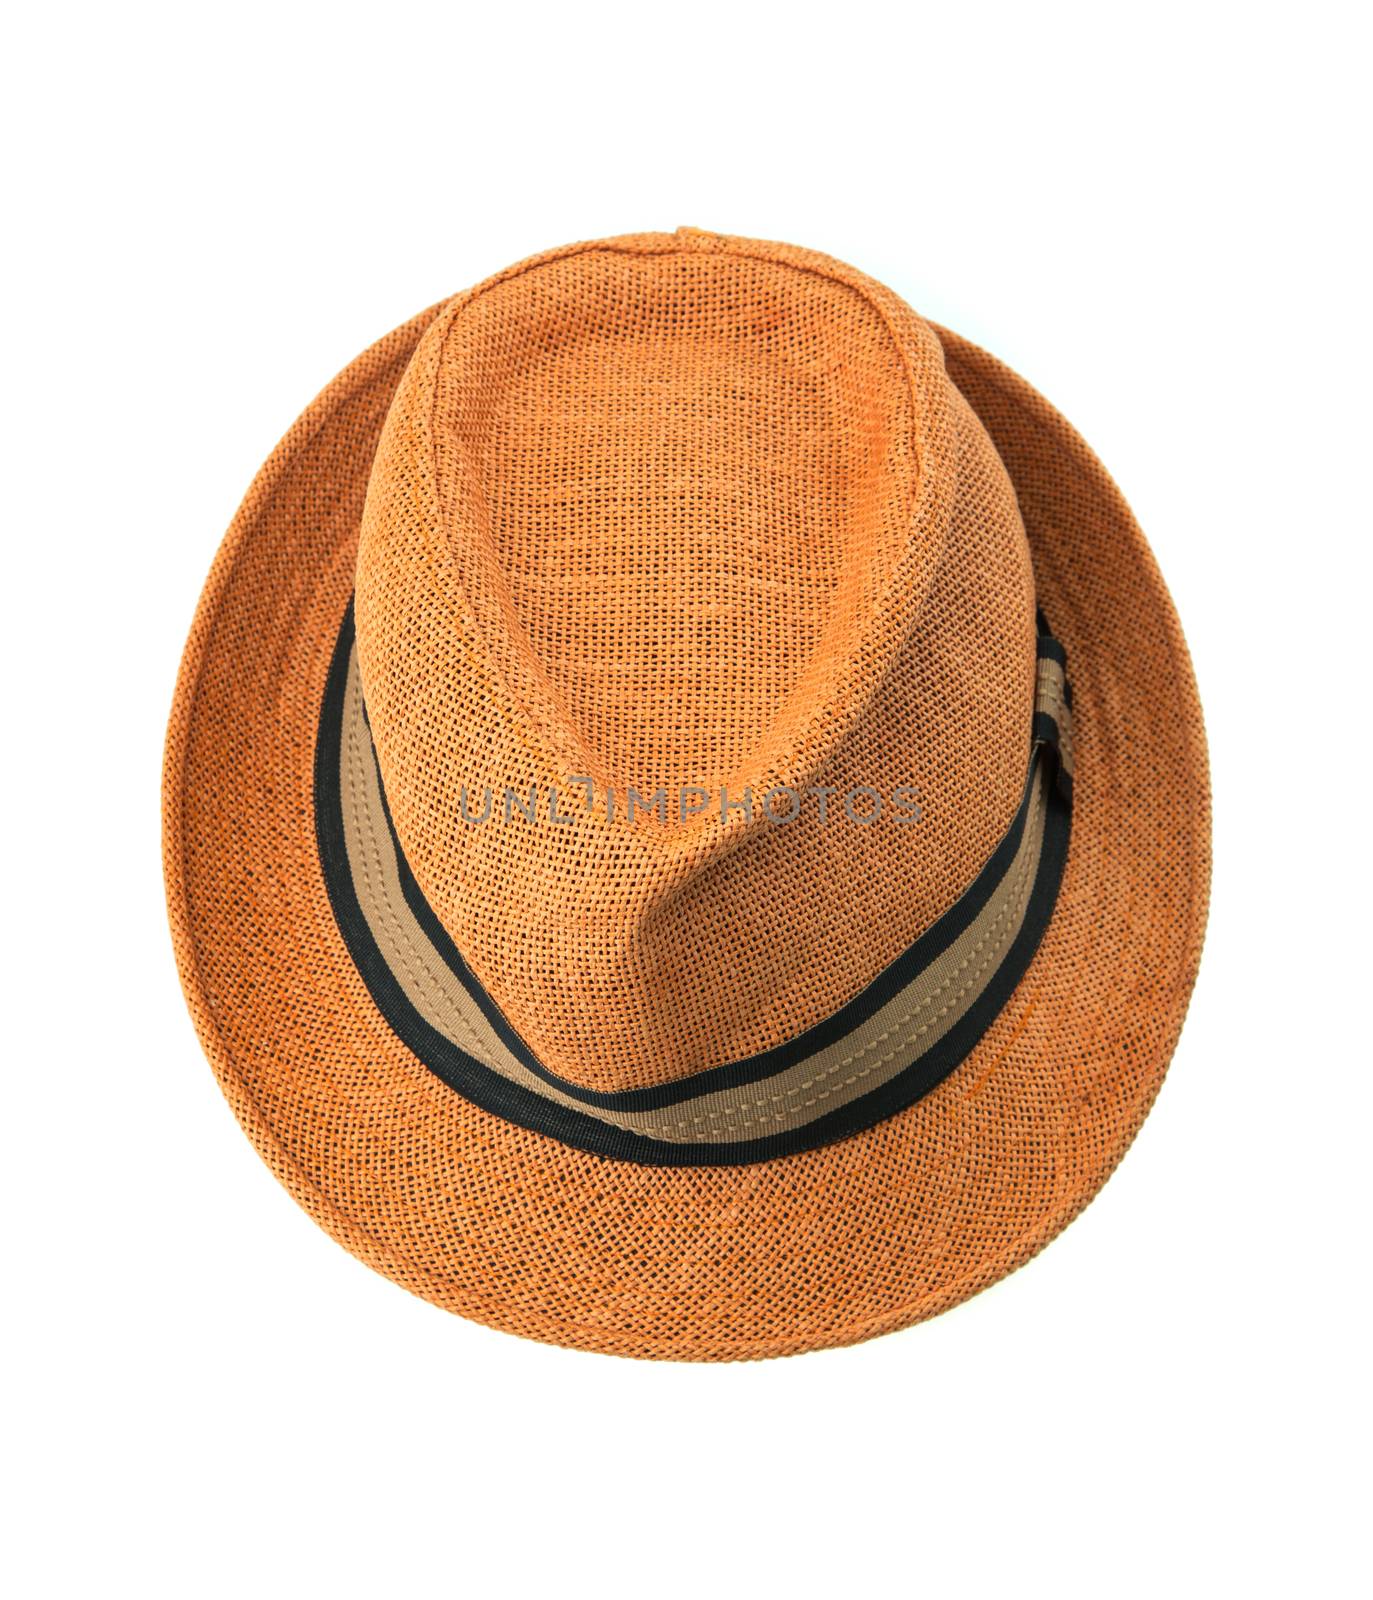 Vintage straw hat for man isolated on white background.